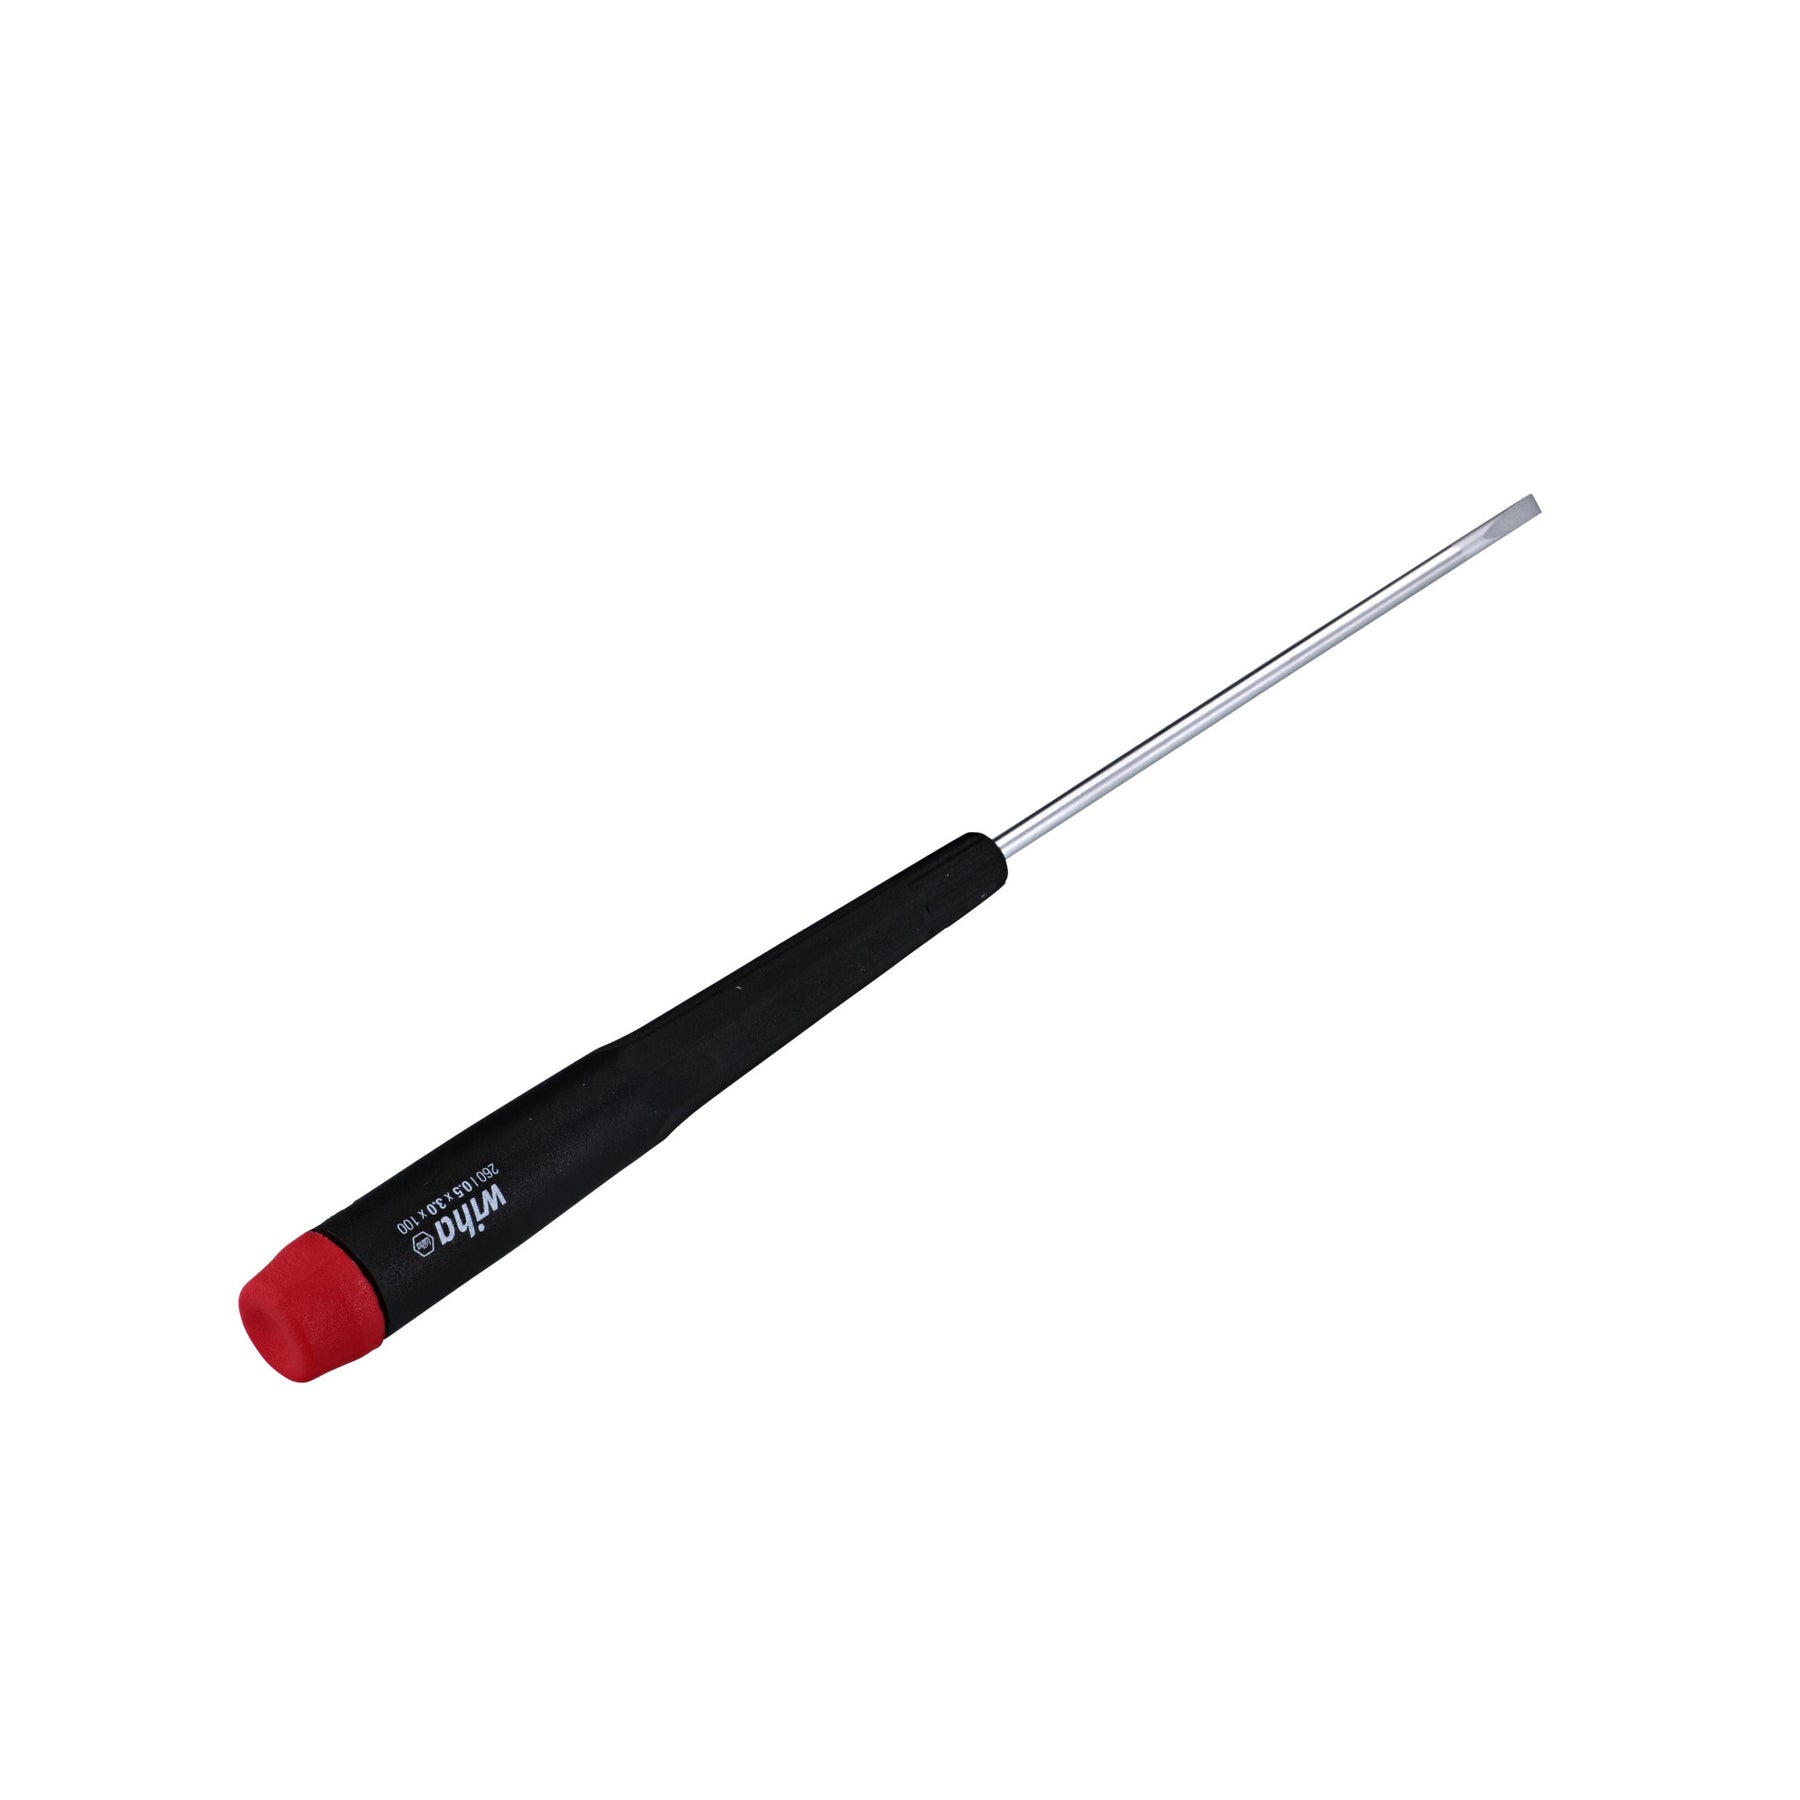 Precision Slotted Screwdriver 3.0mm x 100mm